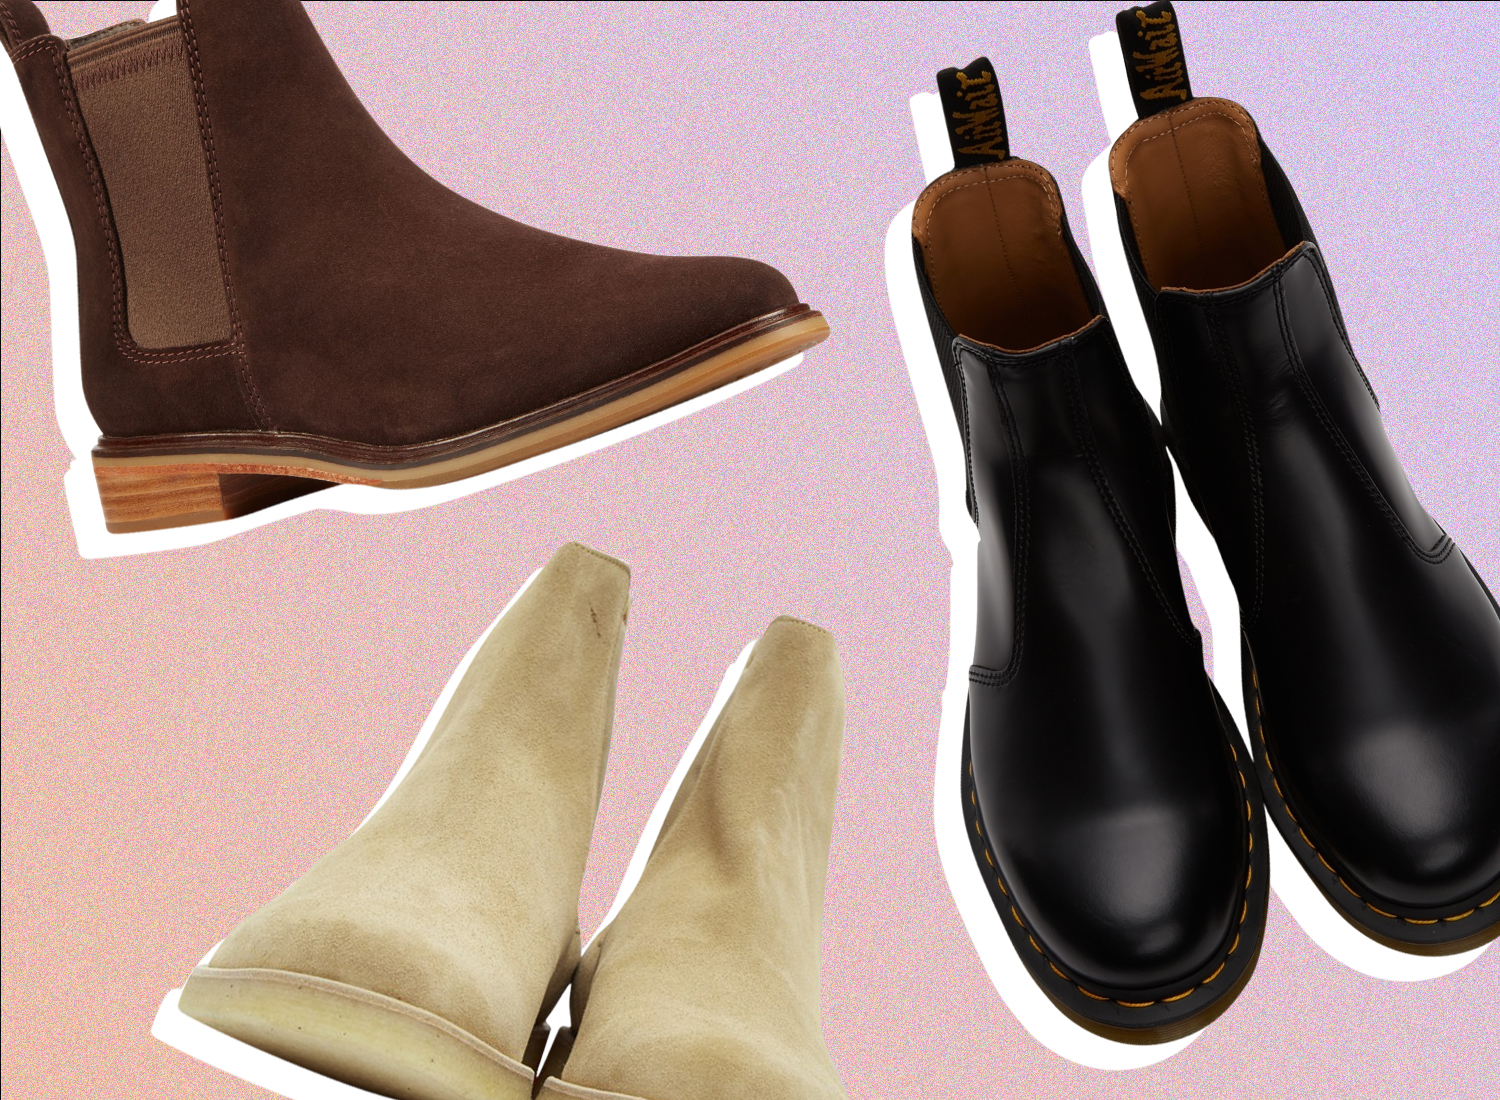 20 Best Chelsea Boots For Men: Waterproof, Stylish & Well-Priced